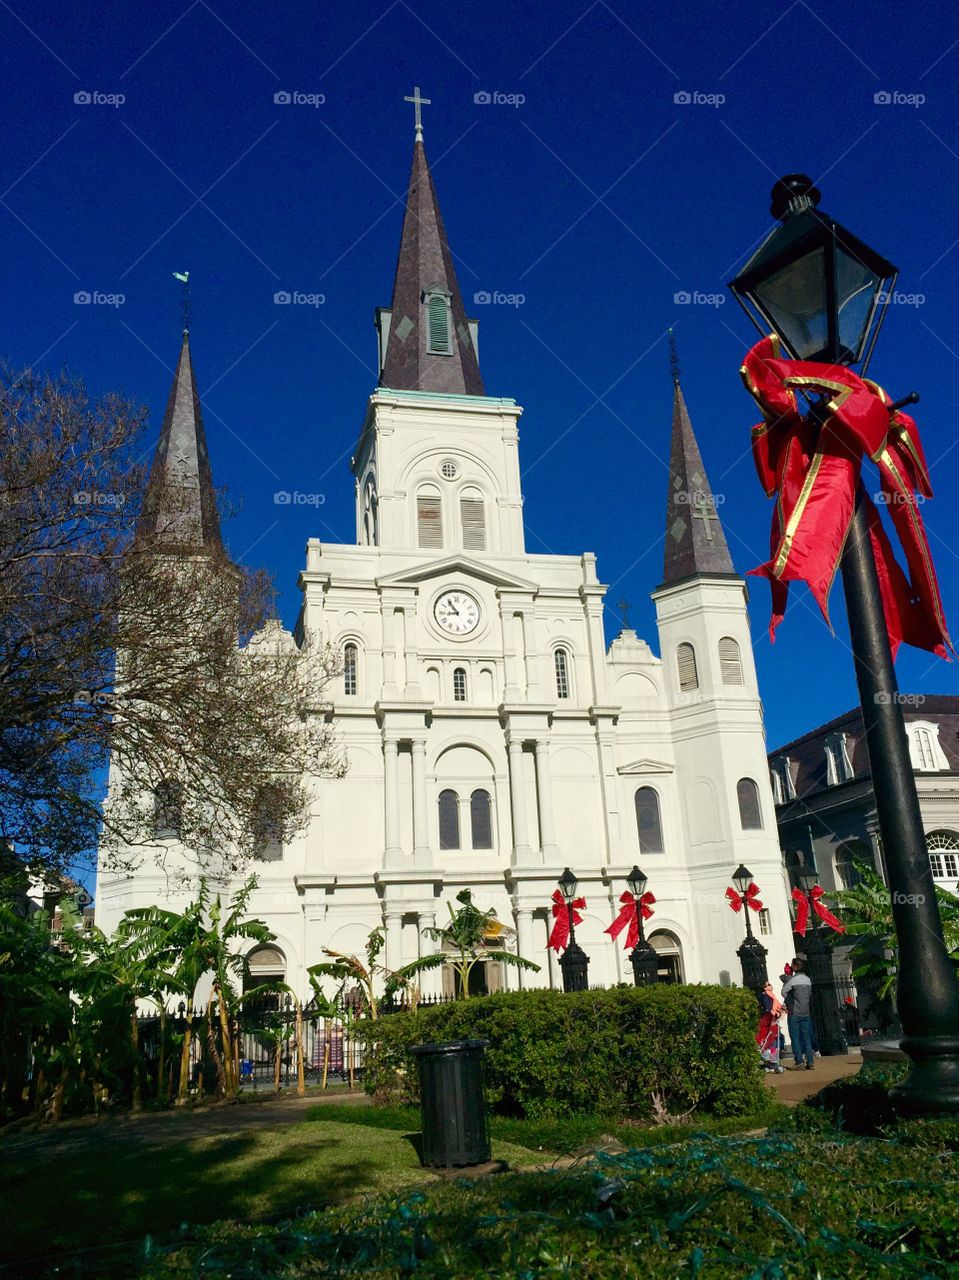 The Bows are up in Jackson Square